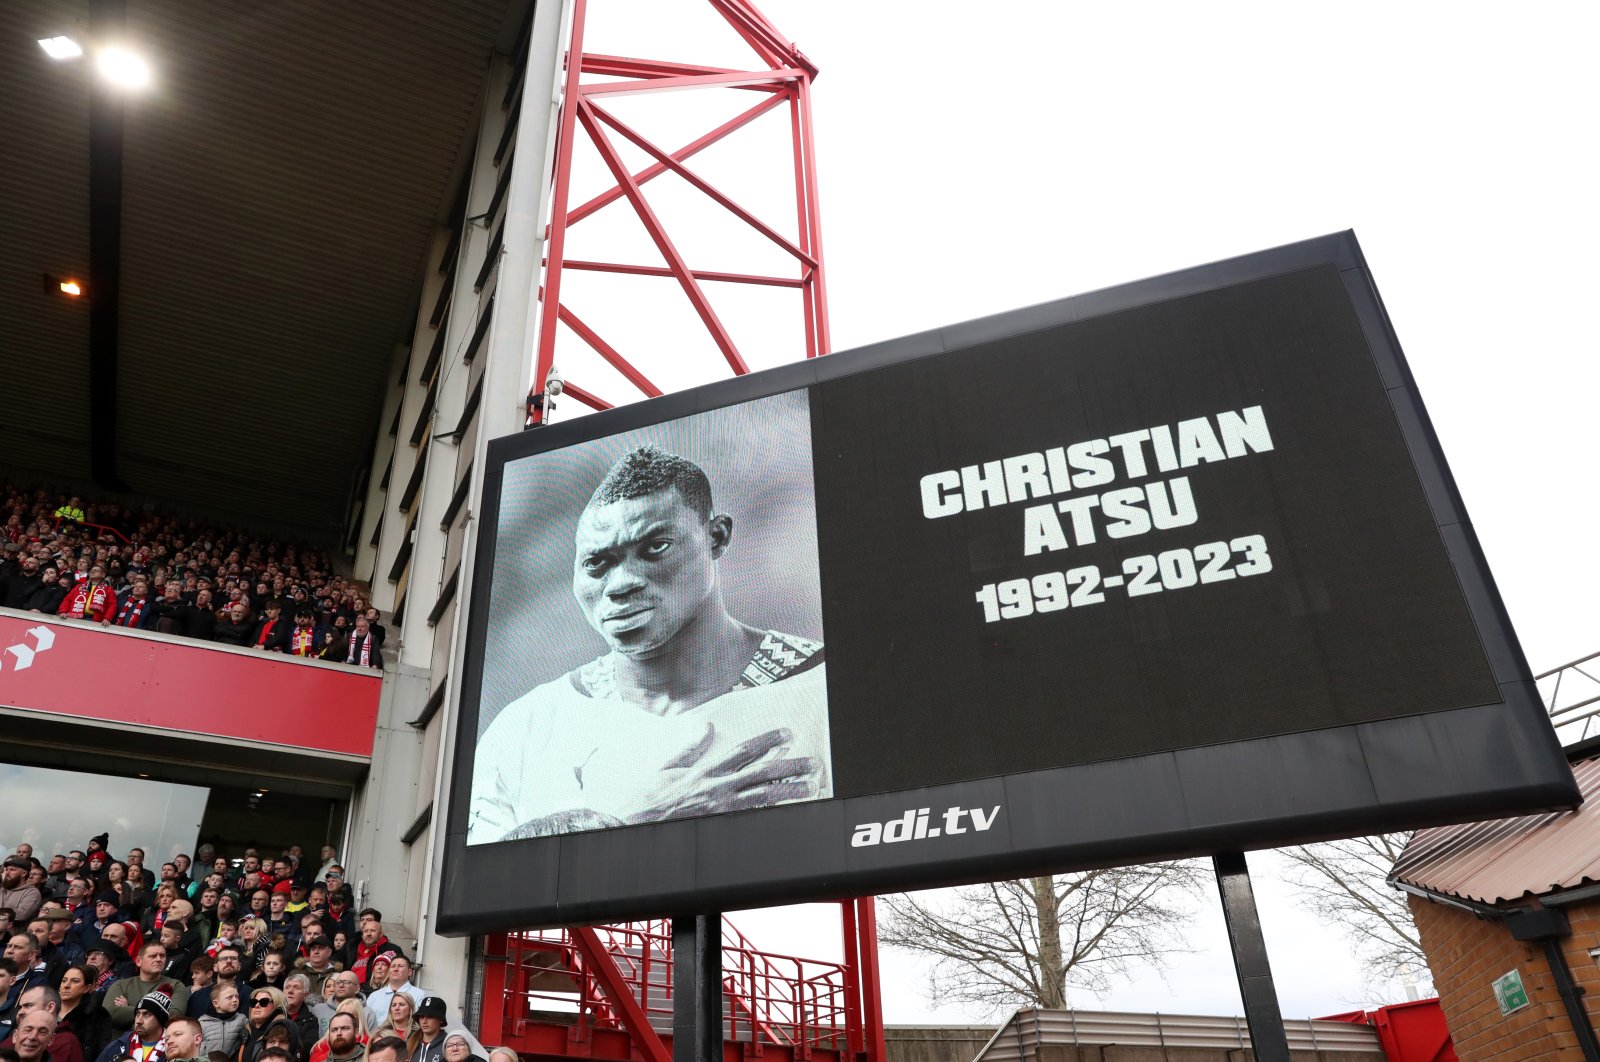 An image of Christian Atsu, who was recovered from the rubble of his home in Hatay following the Türkiye earthquake, is shown on the screen as a minute&#039;s silence is observed in his memory prior to the Premier League match between Nottingham Forest and Manchester City at City Ground, Nottingham, U.K., Feb. 18, 2023. (Getty Images Photo)